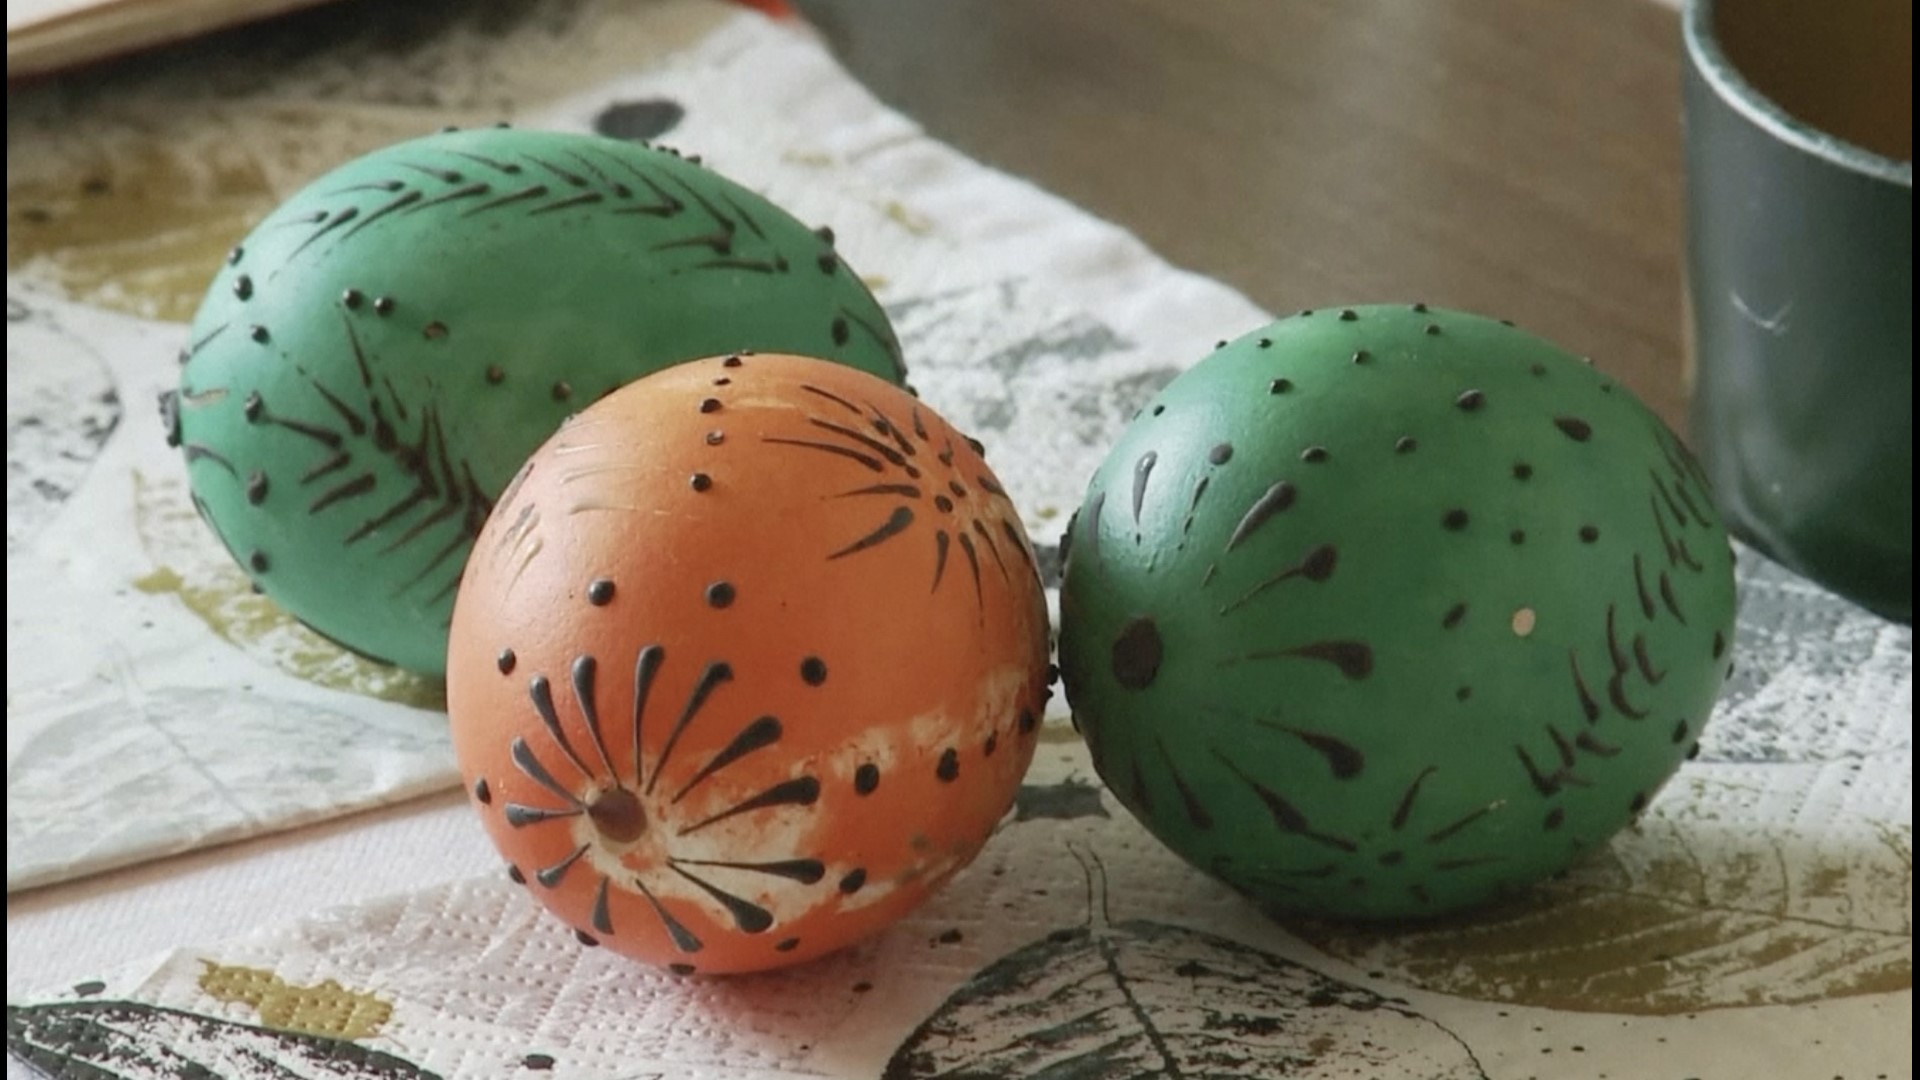 Dyeing eggs is a time-honored Easter tradition that can easily be continued, even amid the coronavirus shutdown.